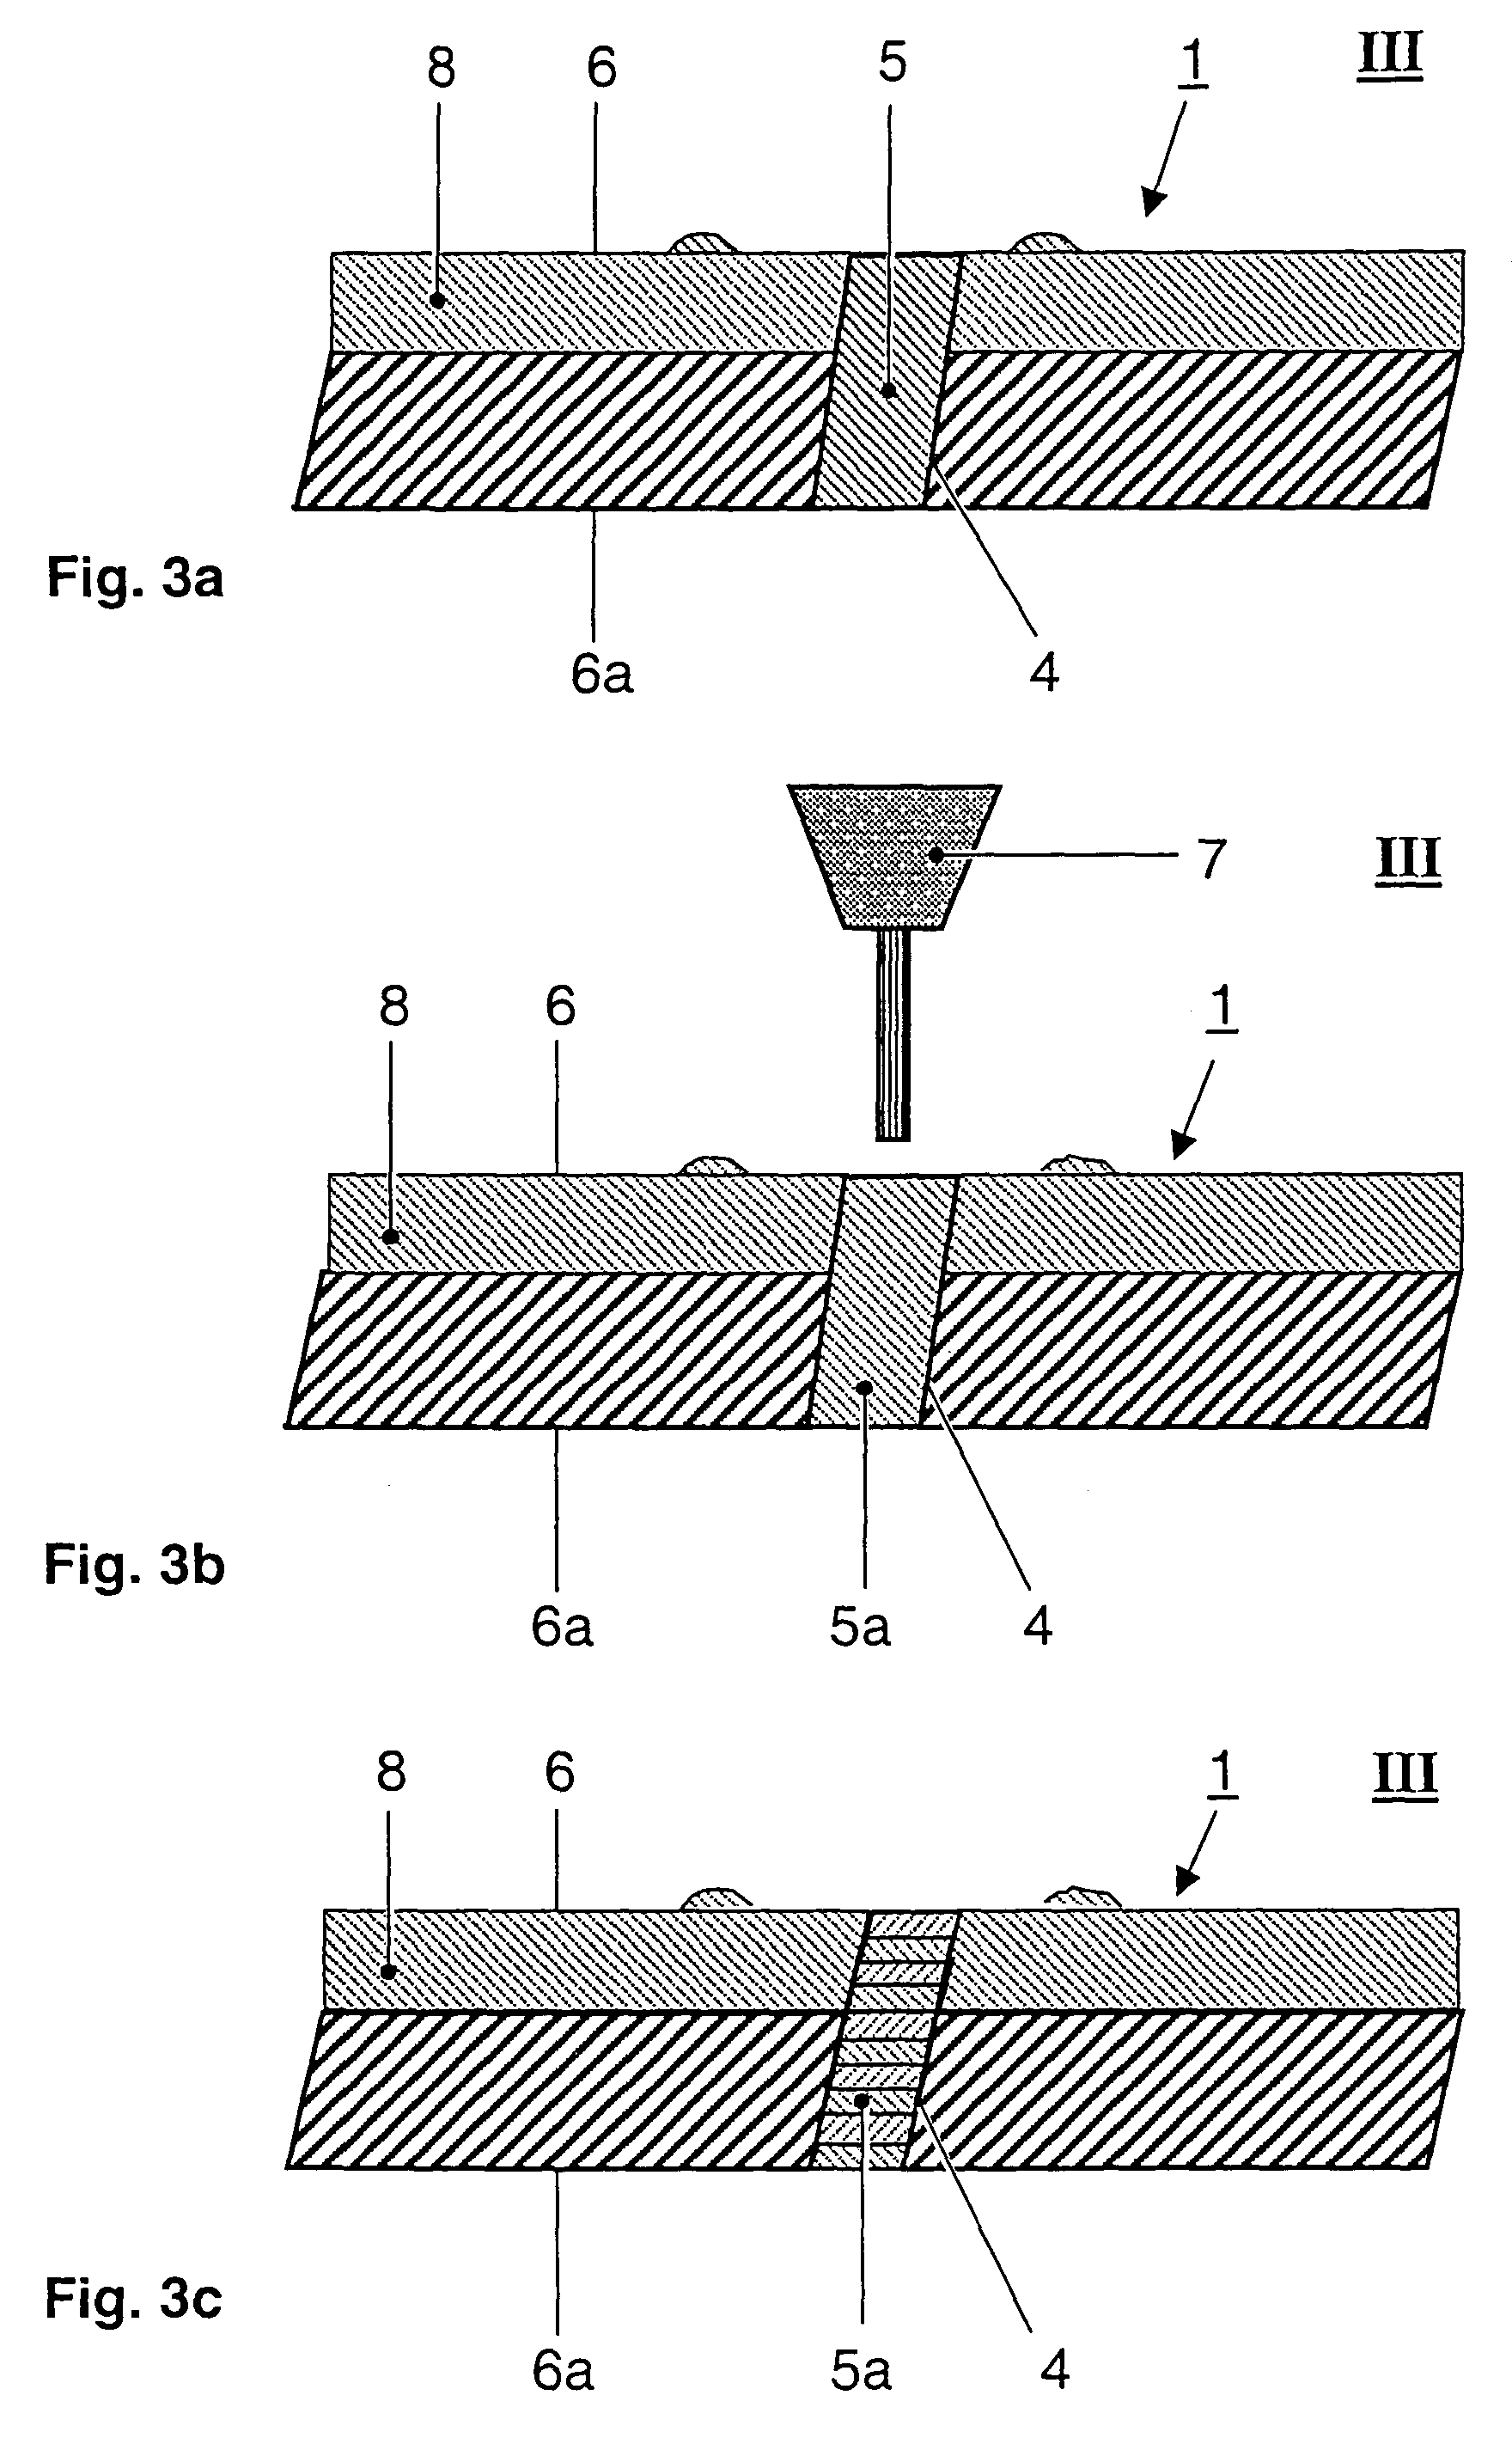 Method of protecting a local area of a component